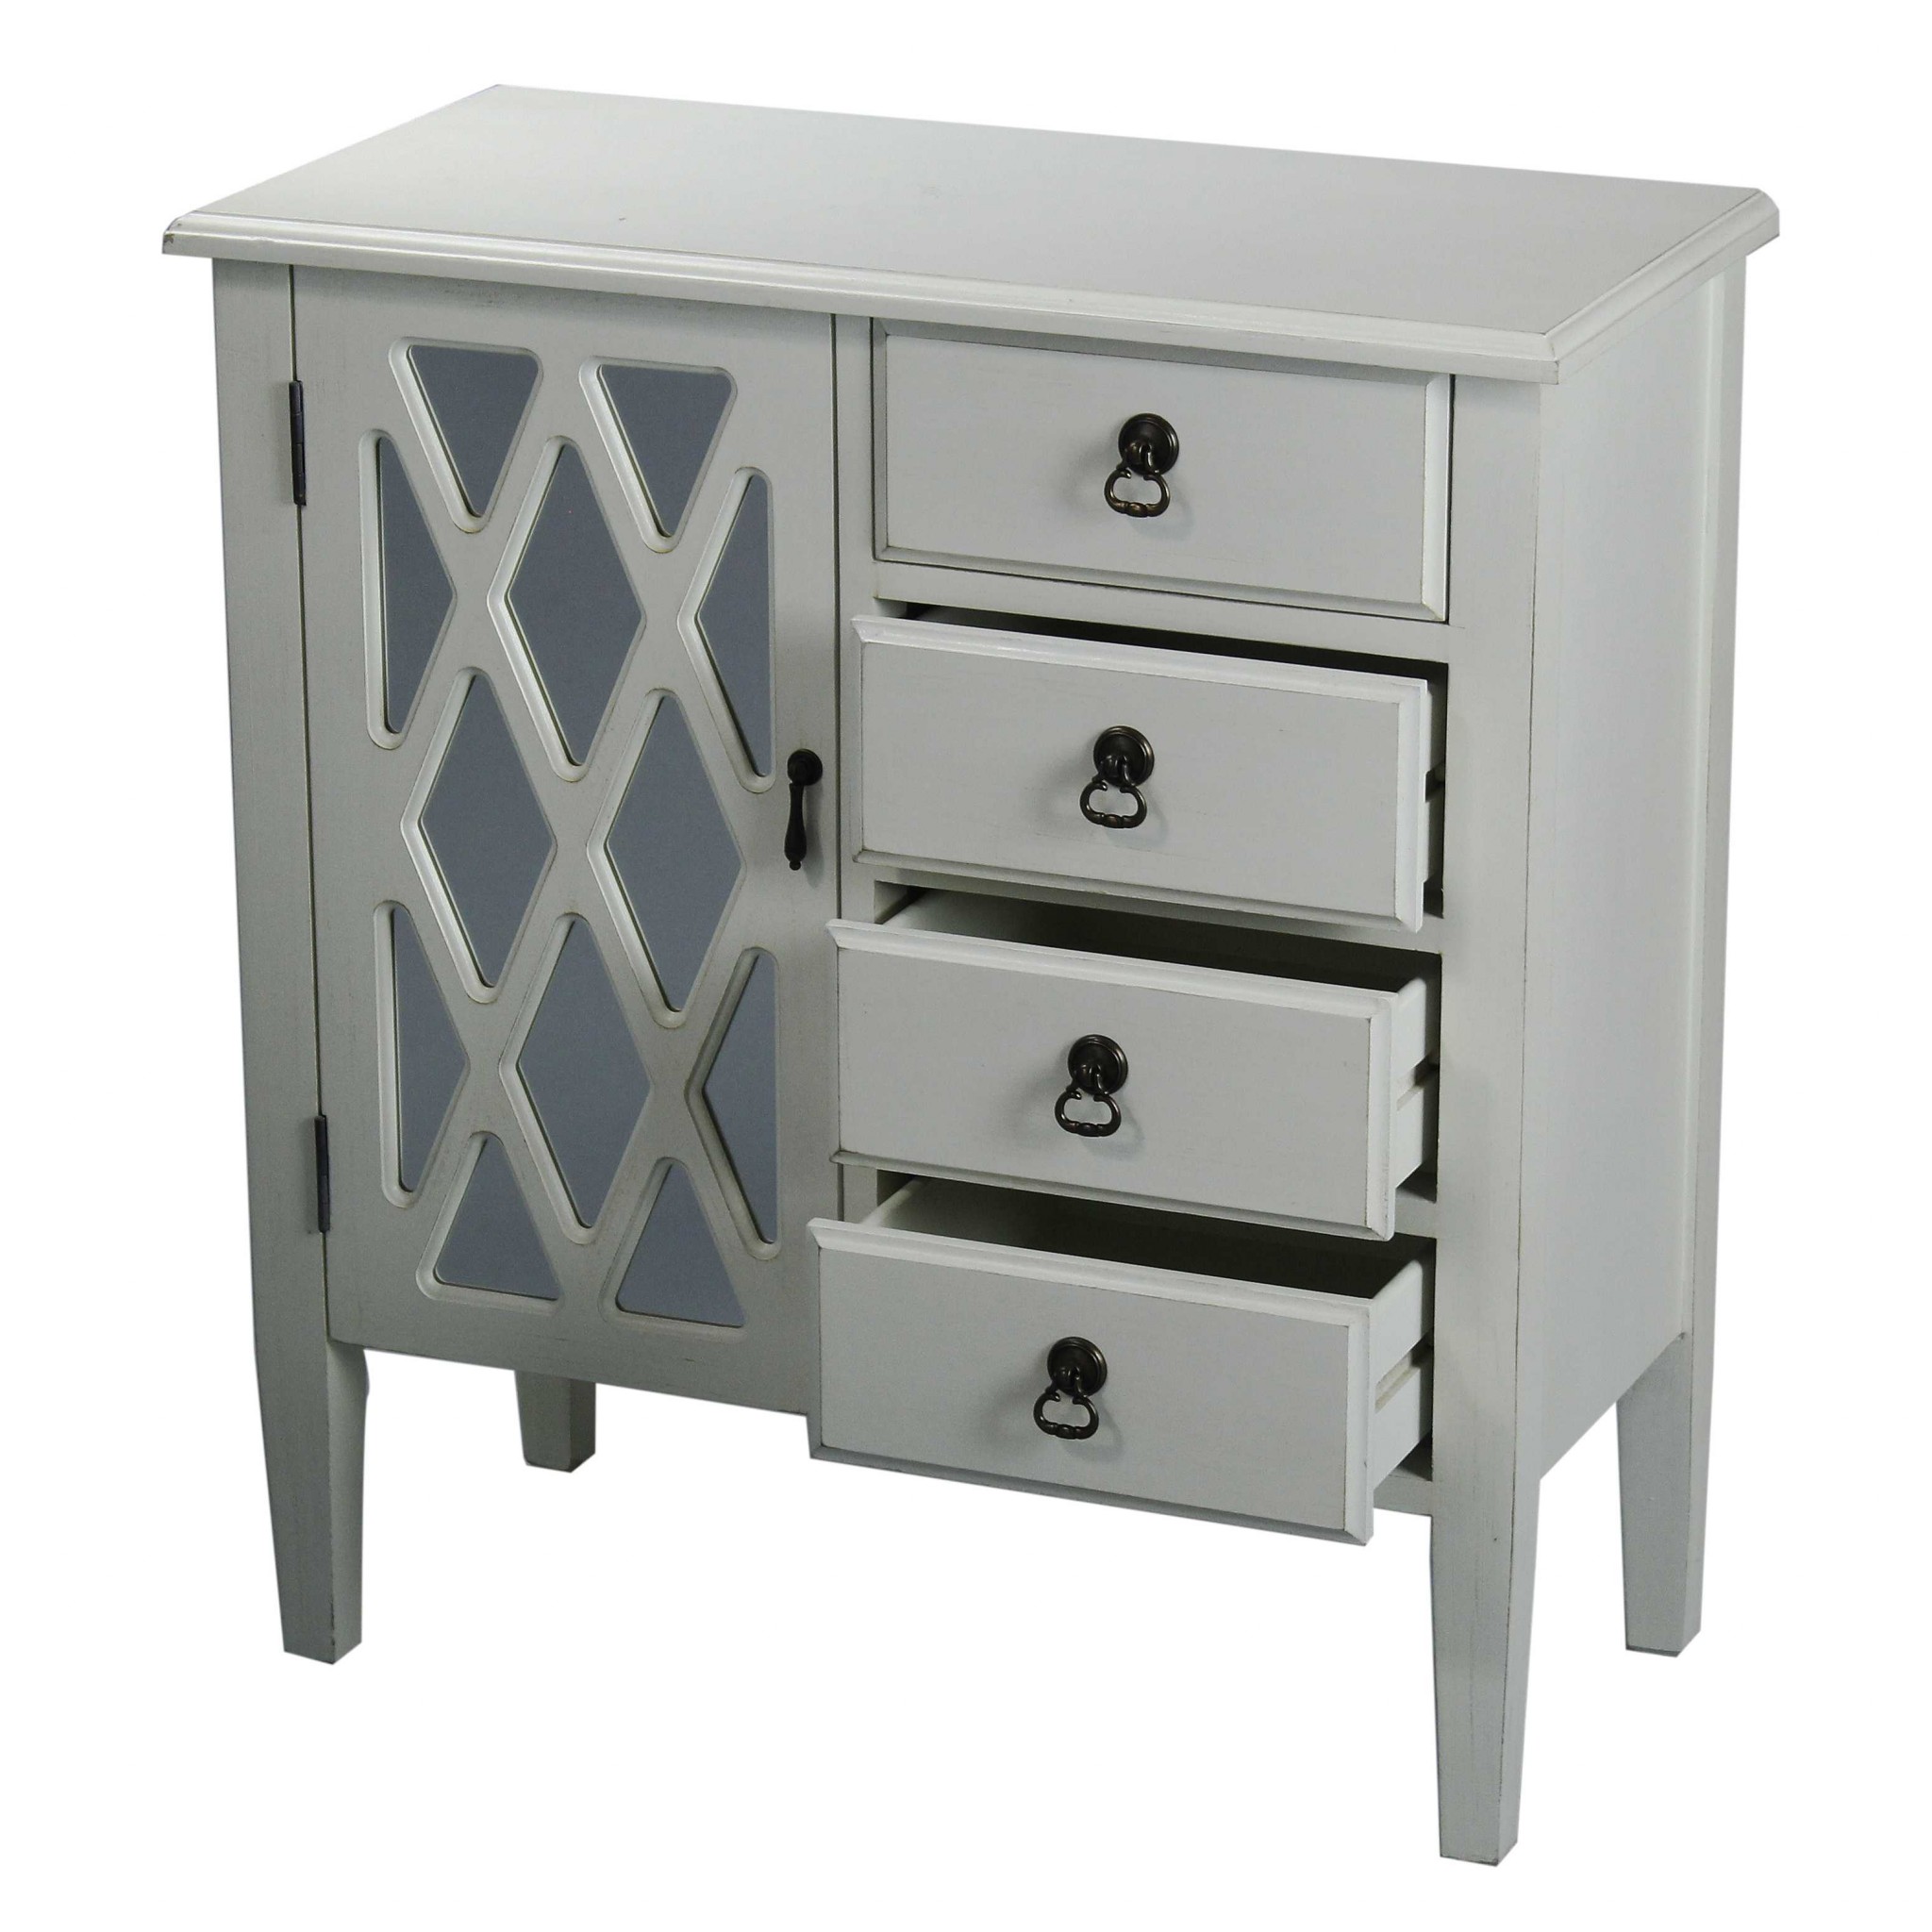 29.5" X 14.25" X 32" Antique White MDF Wood Mirrored Glass Classic Sideboard with a Door and Drawers